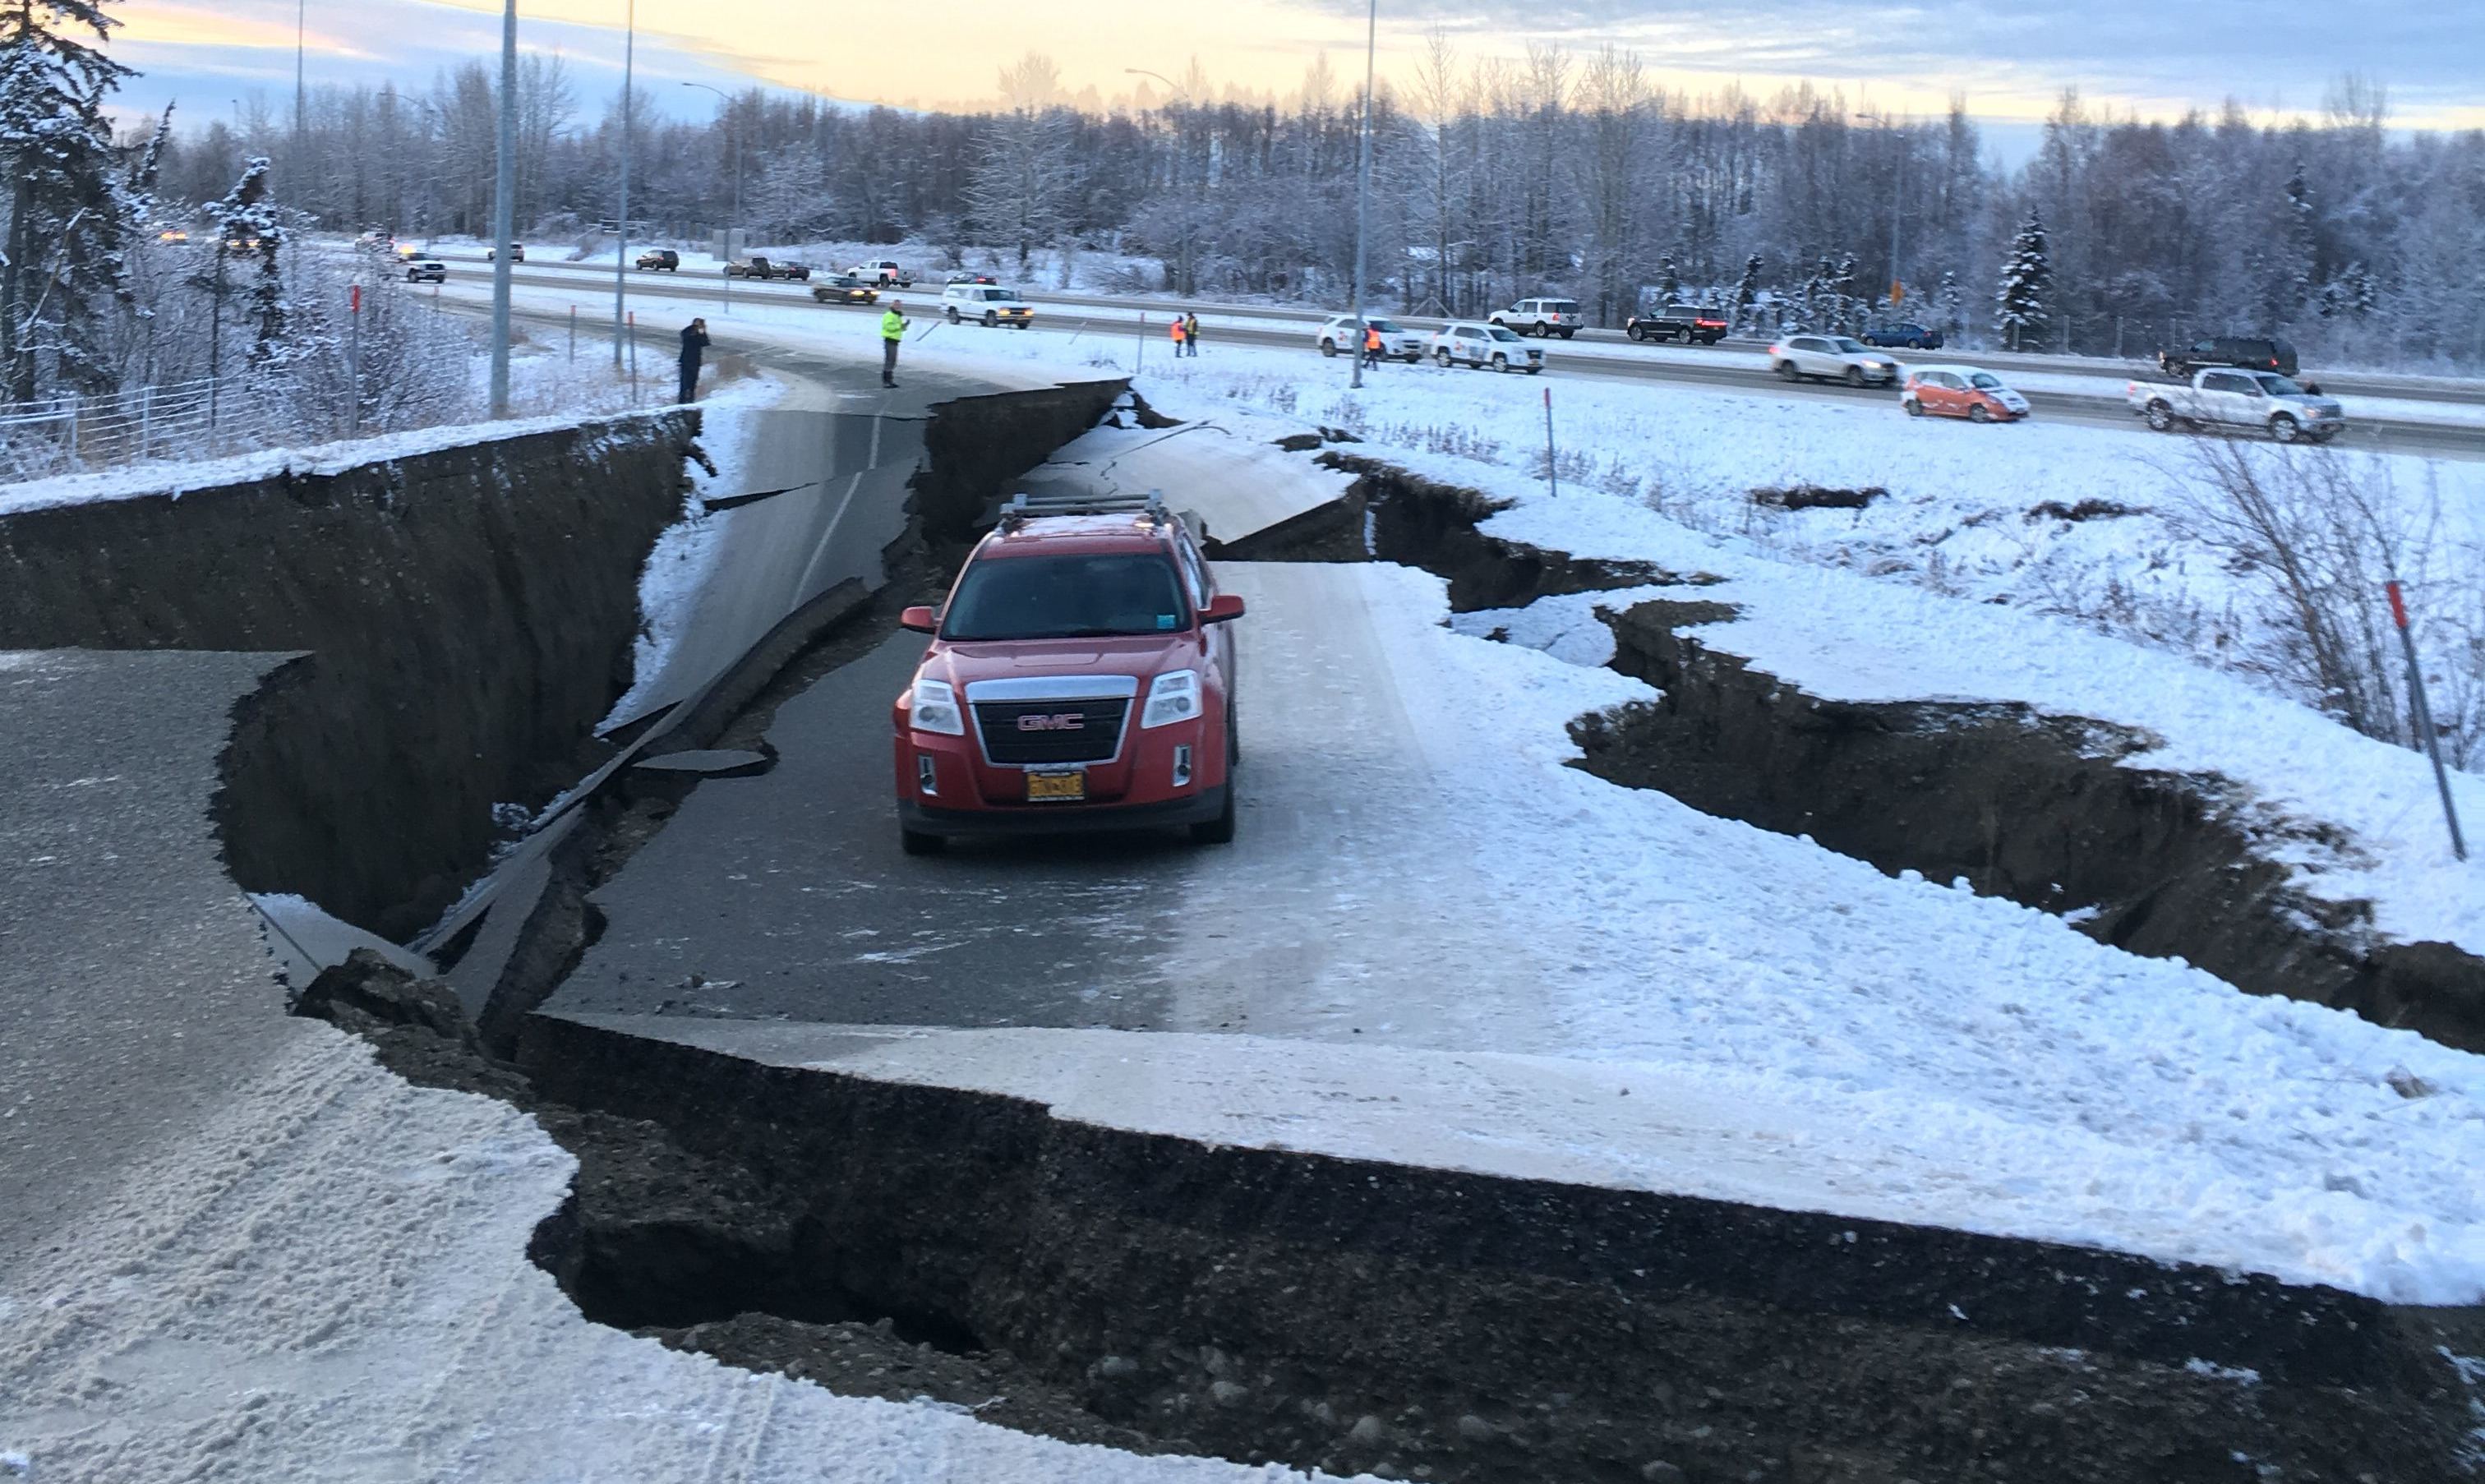 Major Earthquake Damages Buildings And Roads In Anchorage